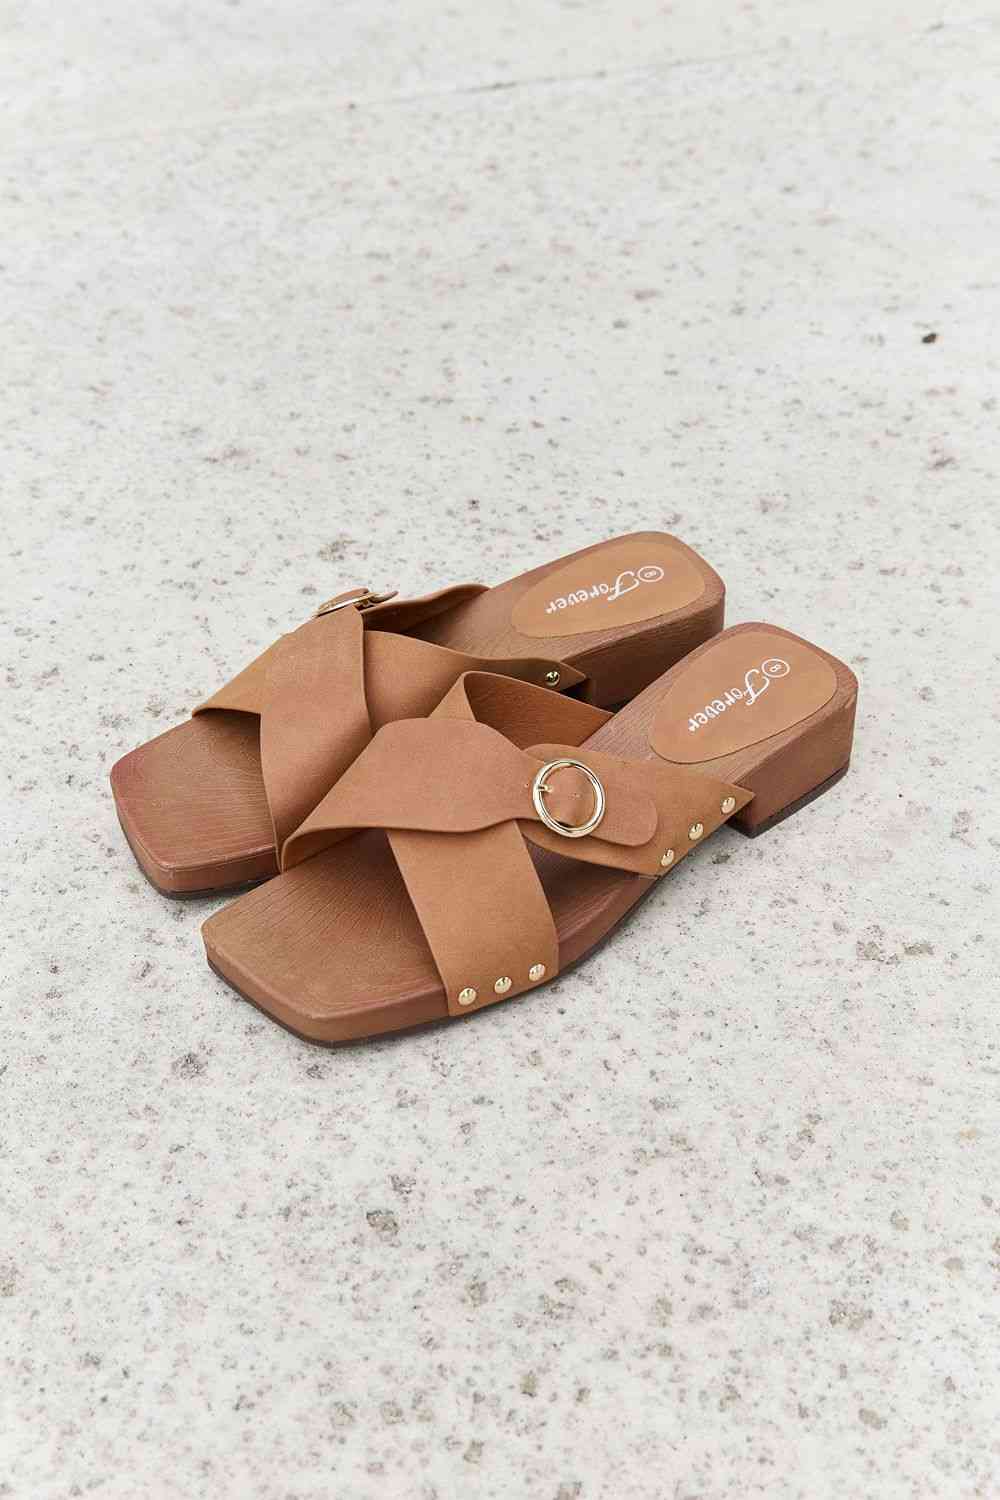 Square Toe Cross Strap Buckle Clog Sandal in Ochre - All Products - Shoes - 7 - 2024